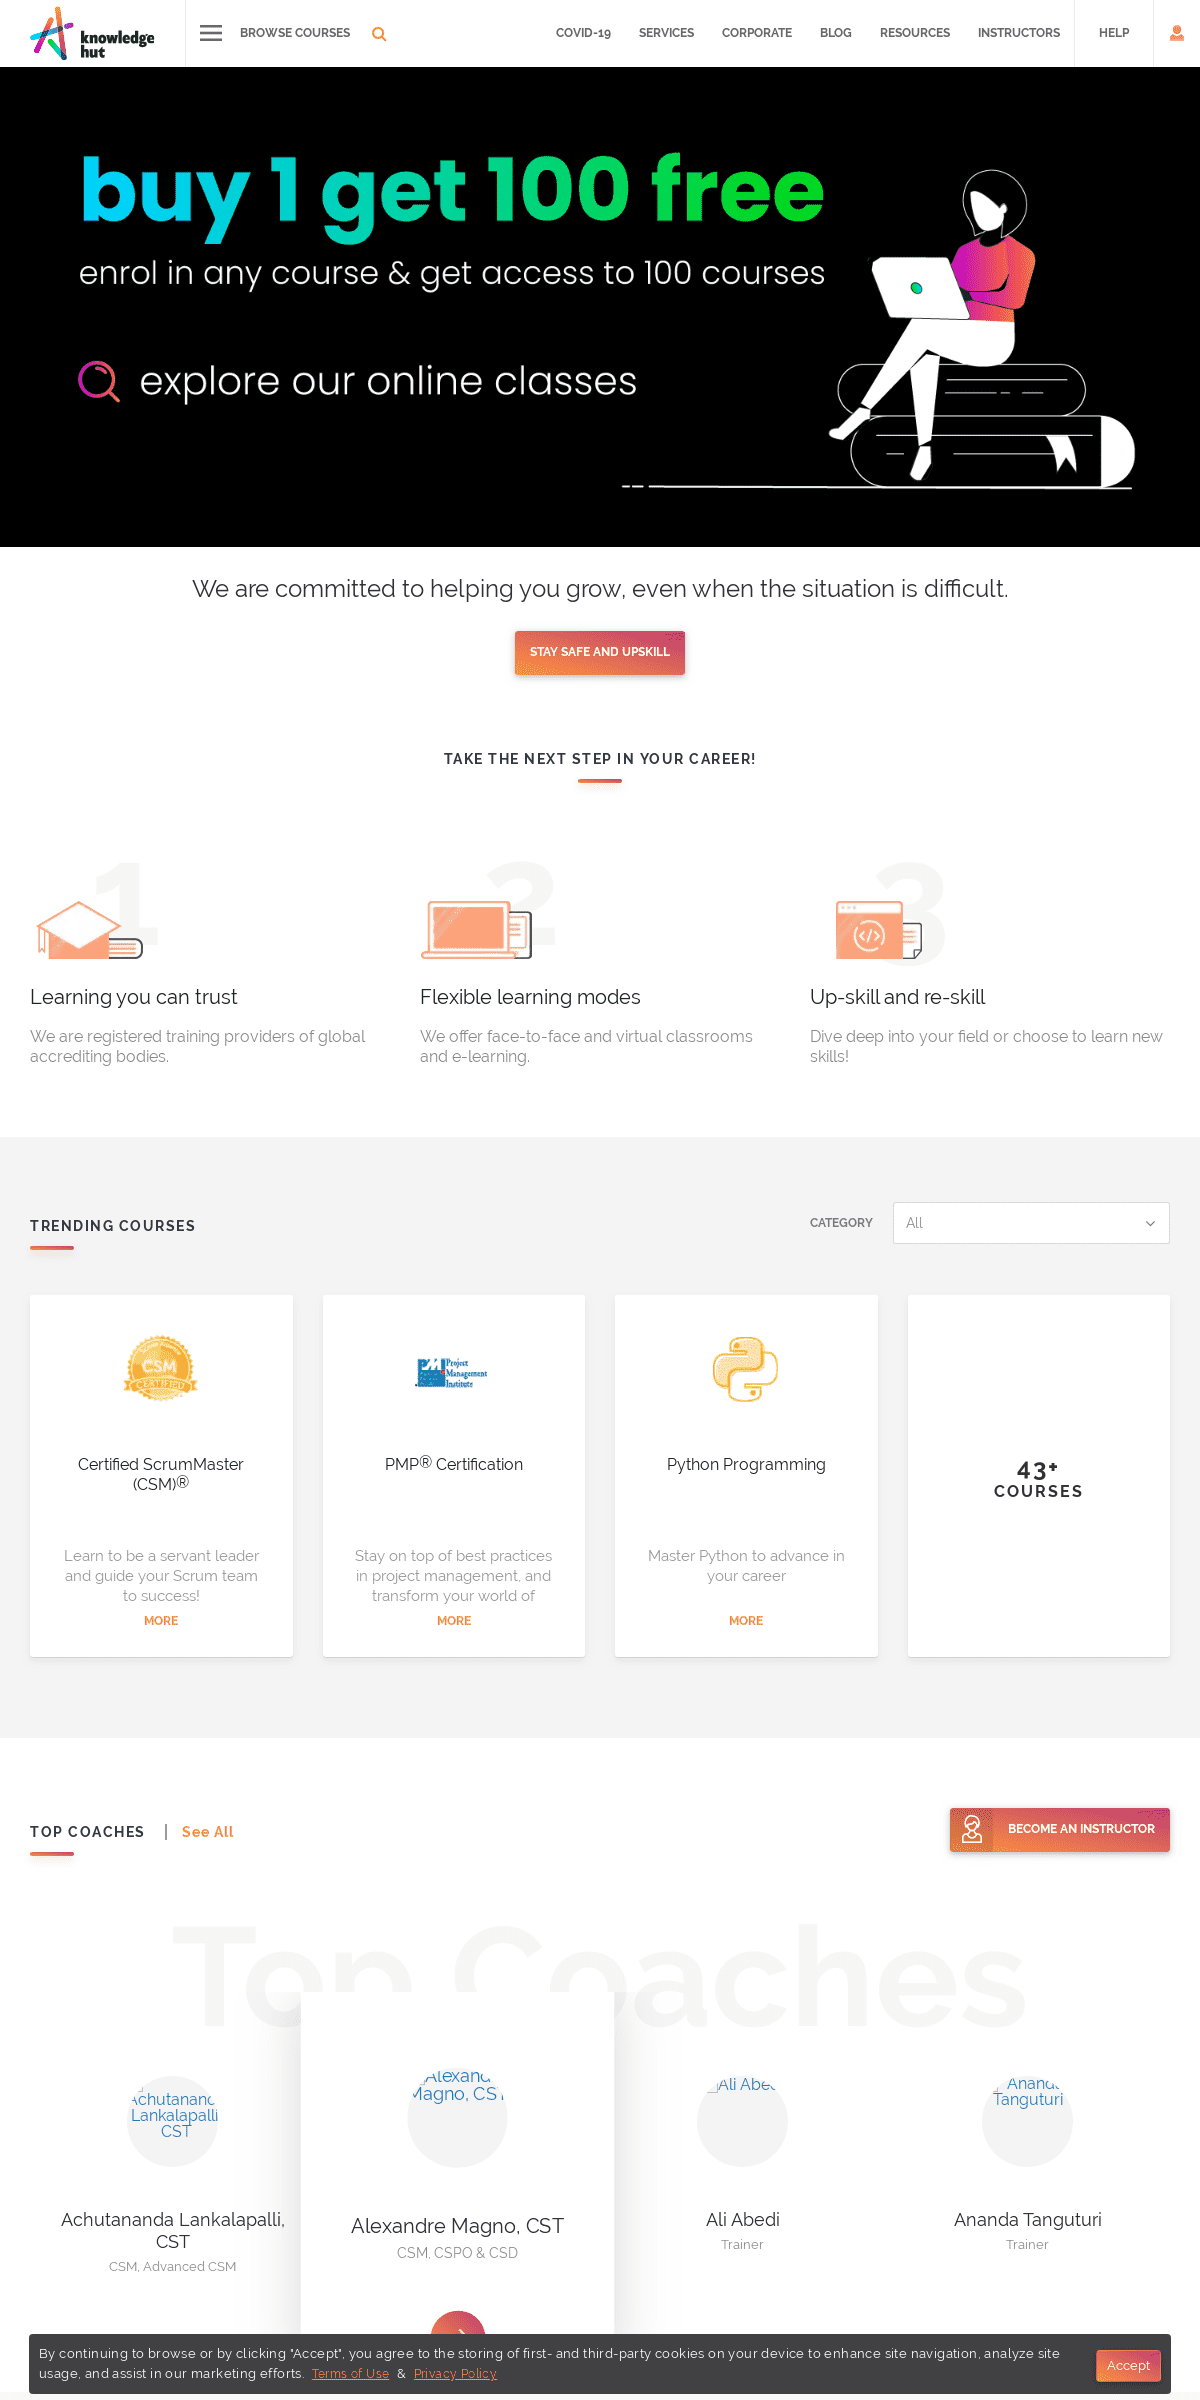 A complete backup of knowledgehut.com